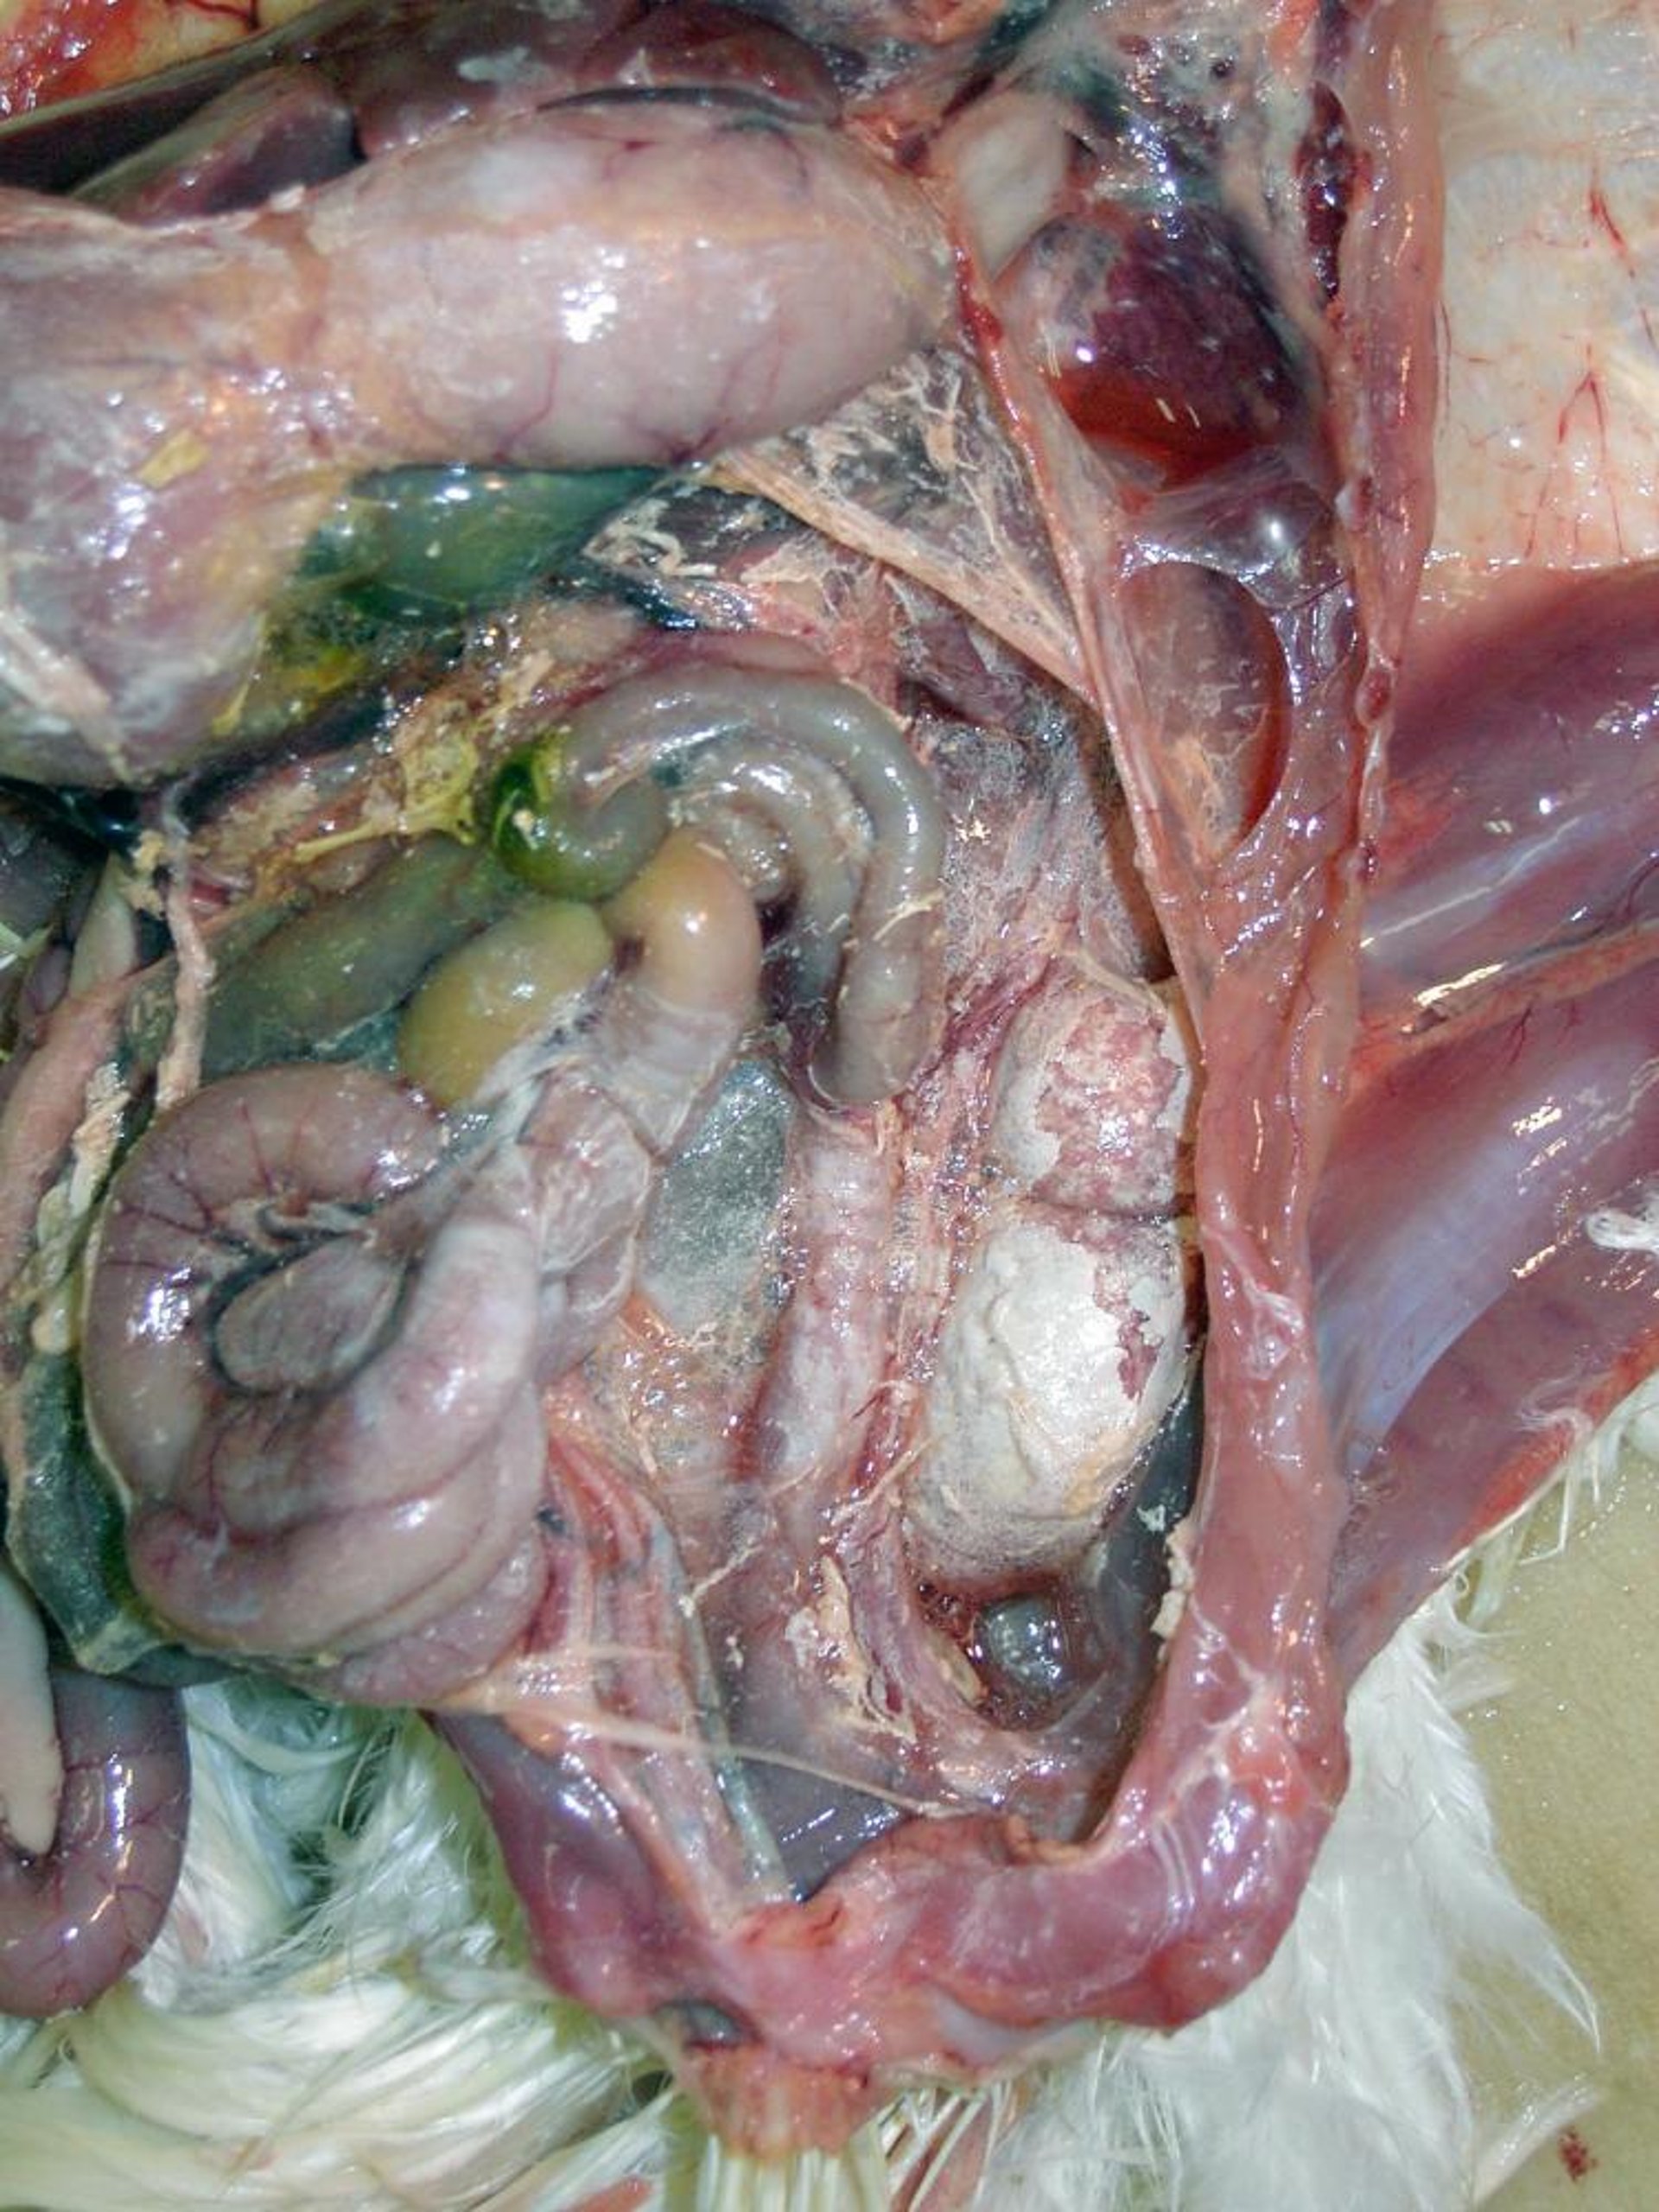 Renal and visceral gout (hyperuricemia) as a result of a high-calcium ration, layer